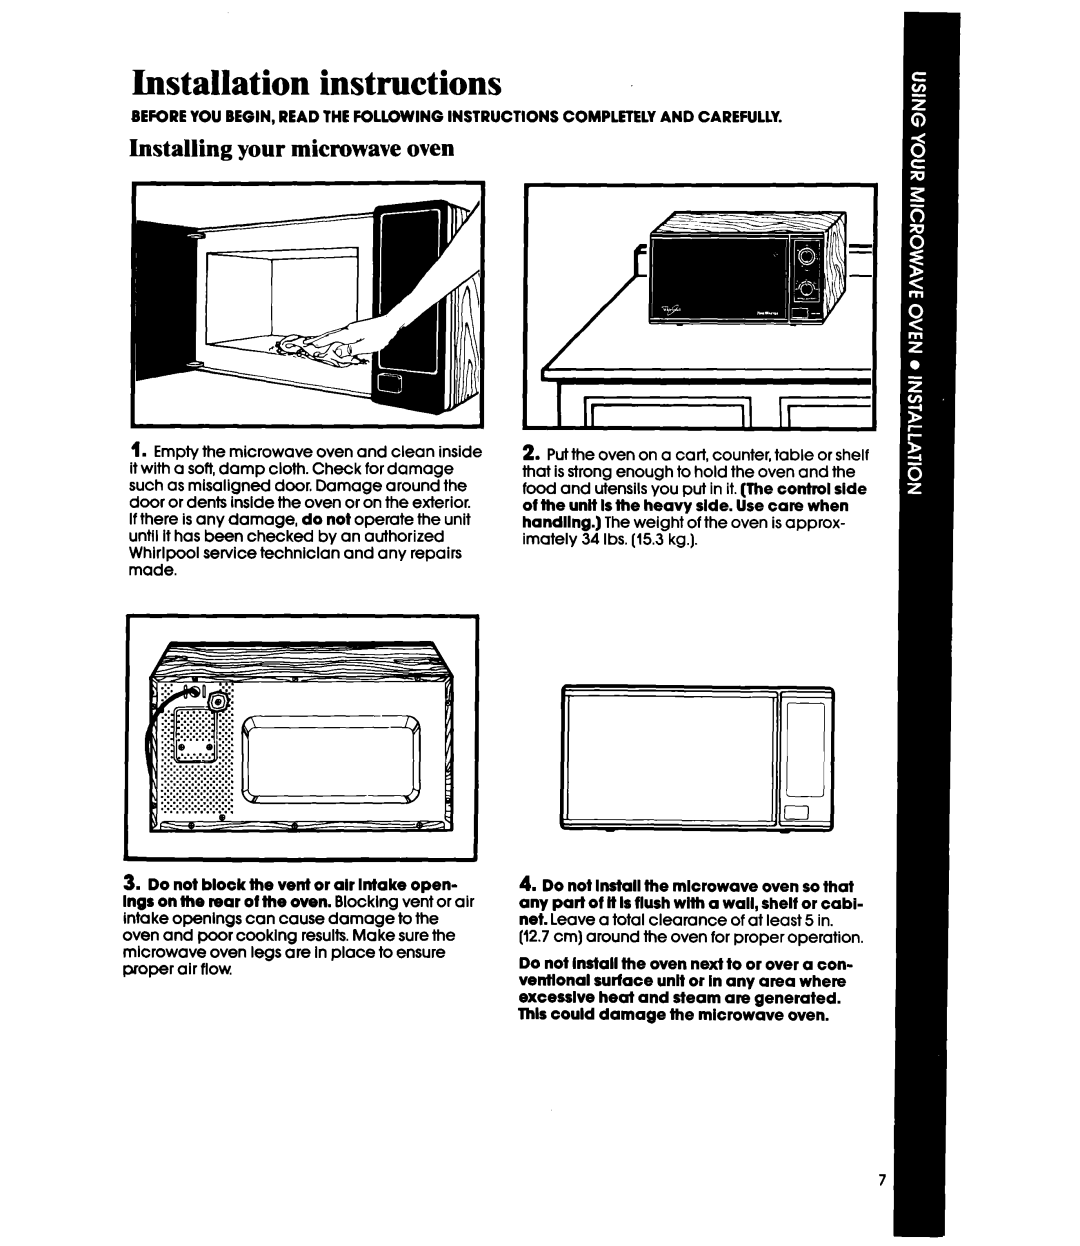 Whirlpool MW1200XS manual Installation instructions, Installing your microwave oven, 11II 